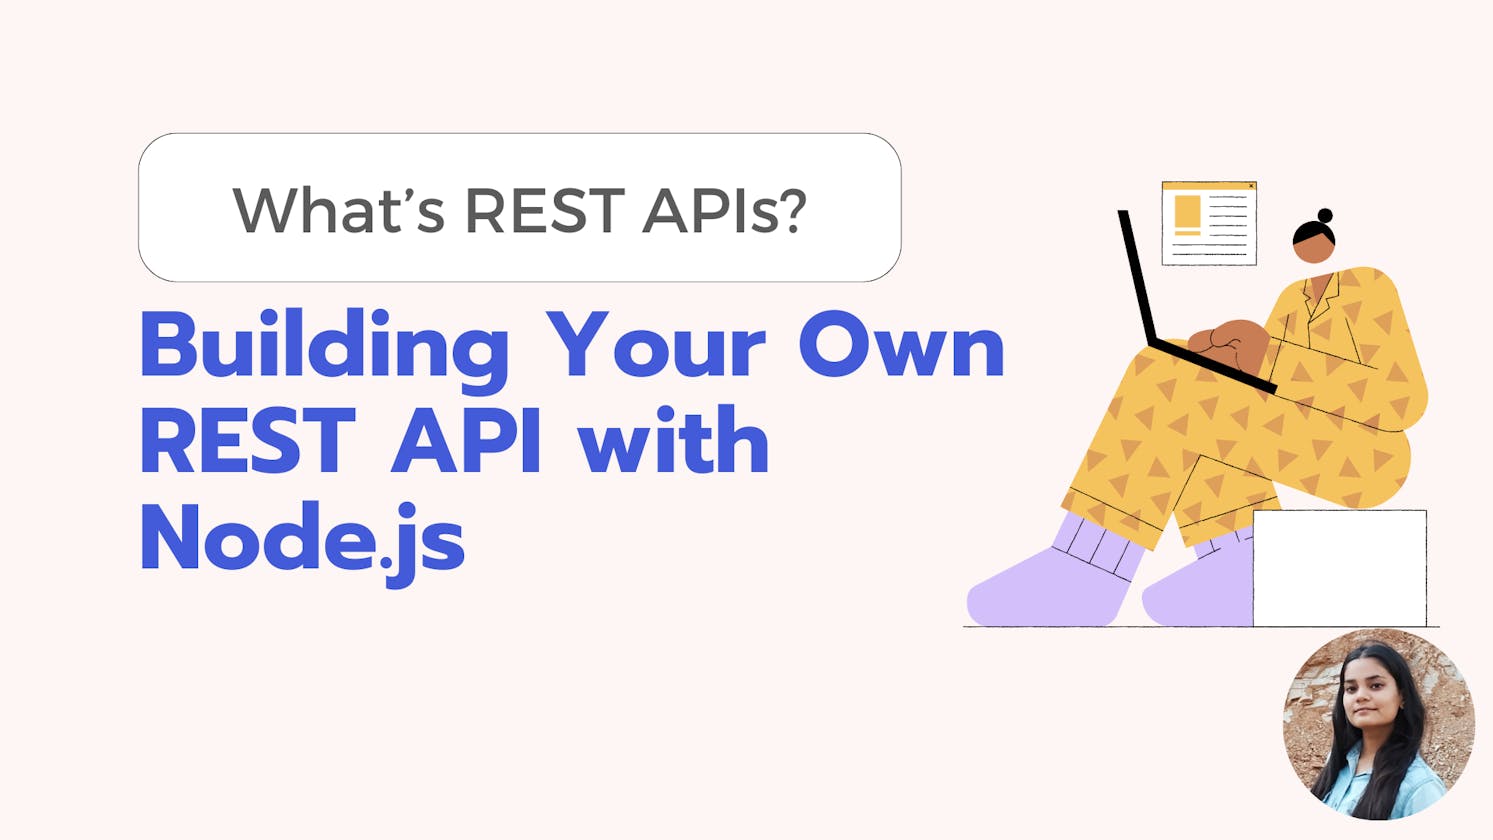 Building Your Own REST API with Node.js